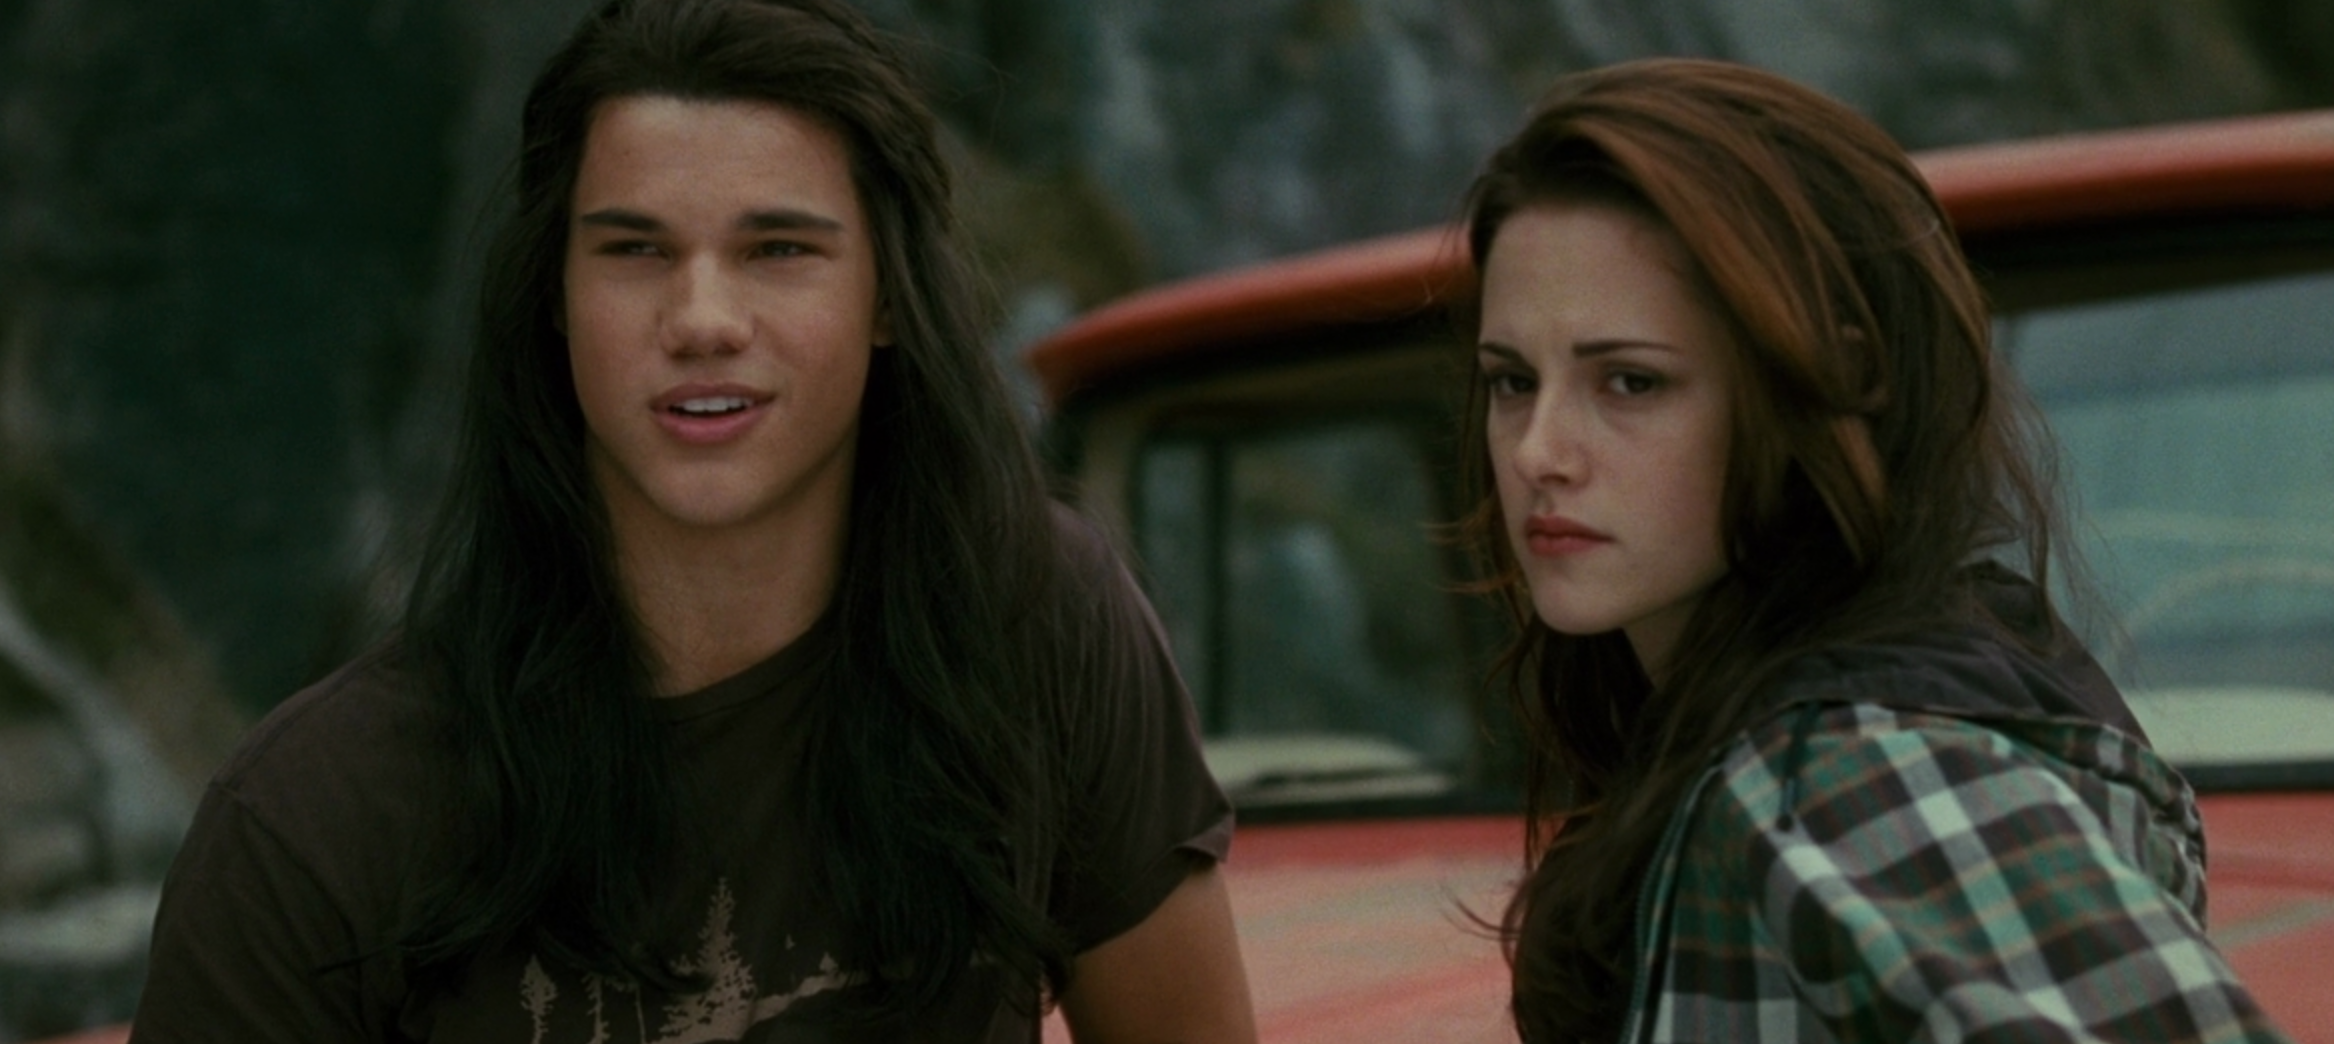 Bella and Jacob standing in front of her truck